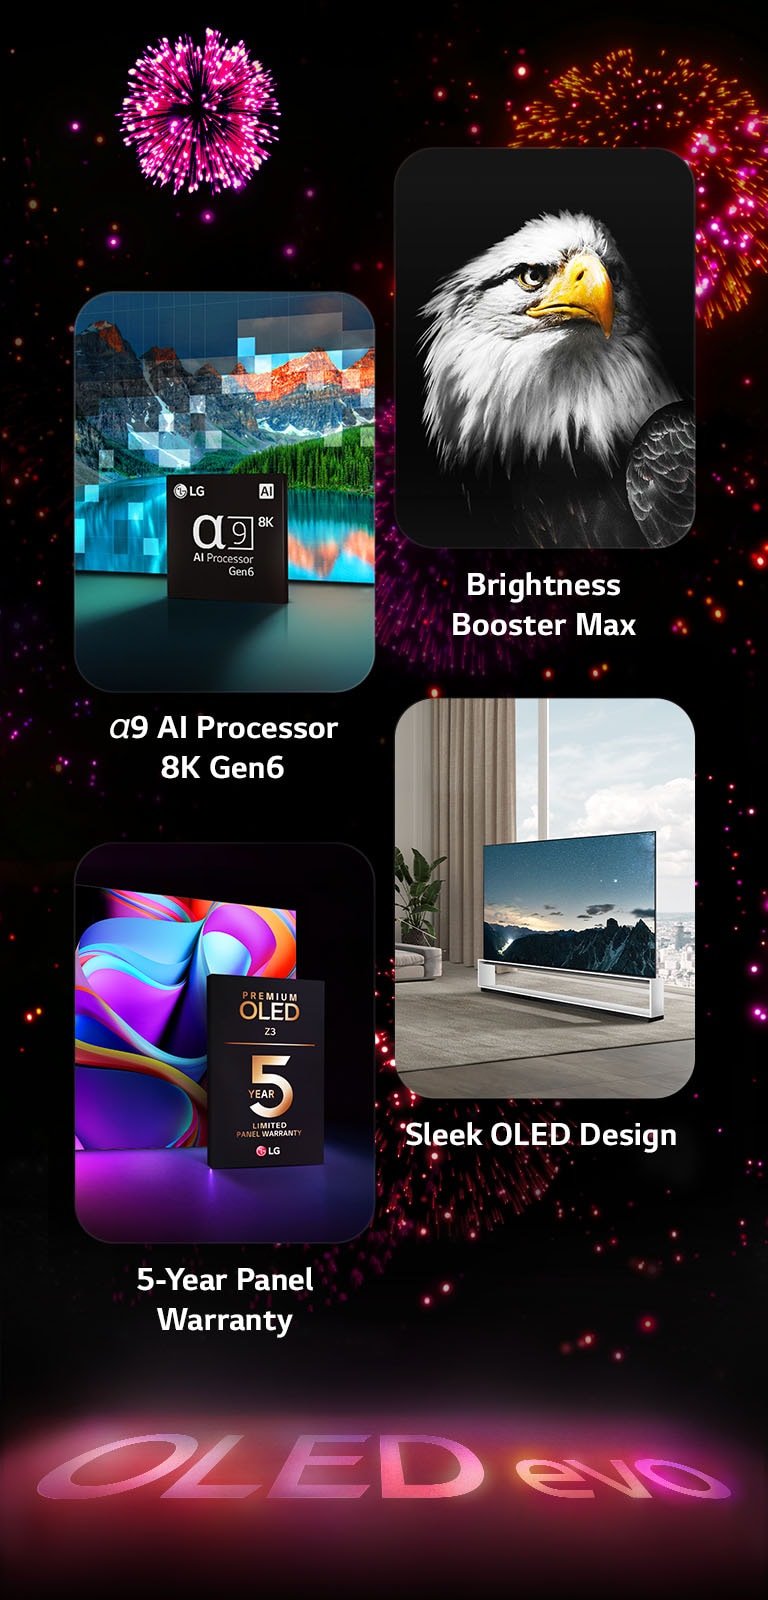 An image presenting the key features of the LG OLED evo Z3 against a black background with a pink and purple firework display. The pink reflection from the firework display on the ground shows the words "OLED evo." Within the picture, an image depicting the α9 AI Processor 8K Gen6 shows the chip standing before a picture of a lake scene being remastered with the processing technology. An image presenting Brightness Booster Max shows a bird with deep contrast and bright whites. An image presenting the 5-Year Panel Warranty shows the Premium OLED Z3 warranty logo with the display in the backdrop. An image presenting Sleek OLED Design shows the floor stand LG OLED evo Z3 in front of a large window looking out onto a cityscape in a clean, minimalist living room.